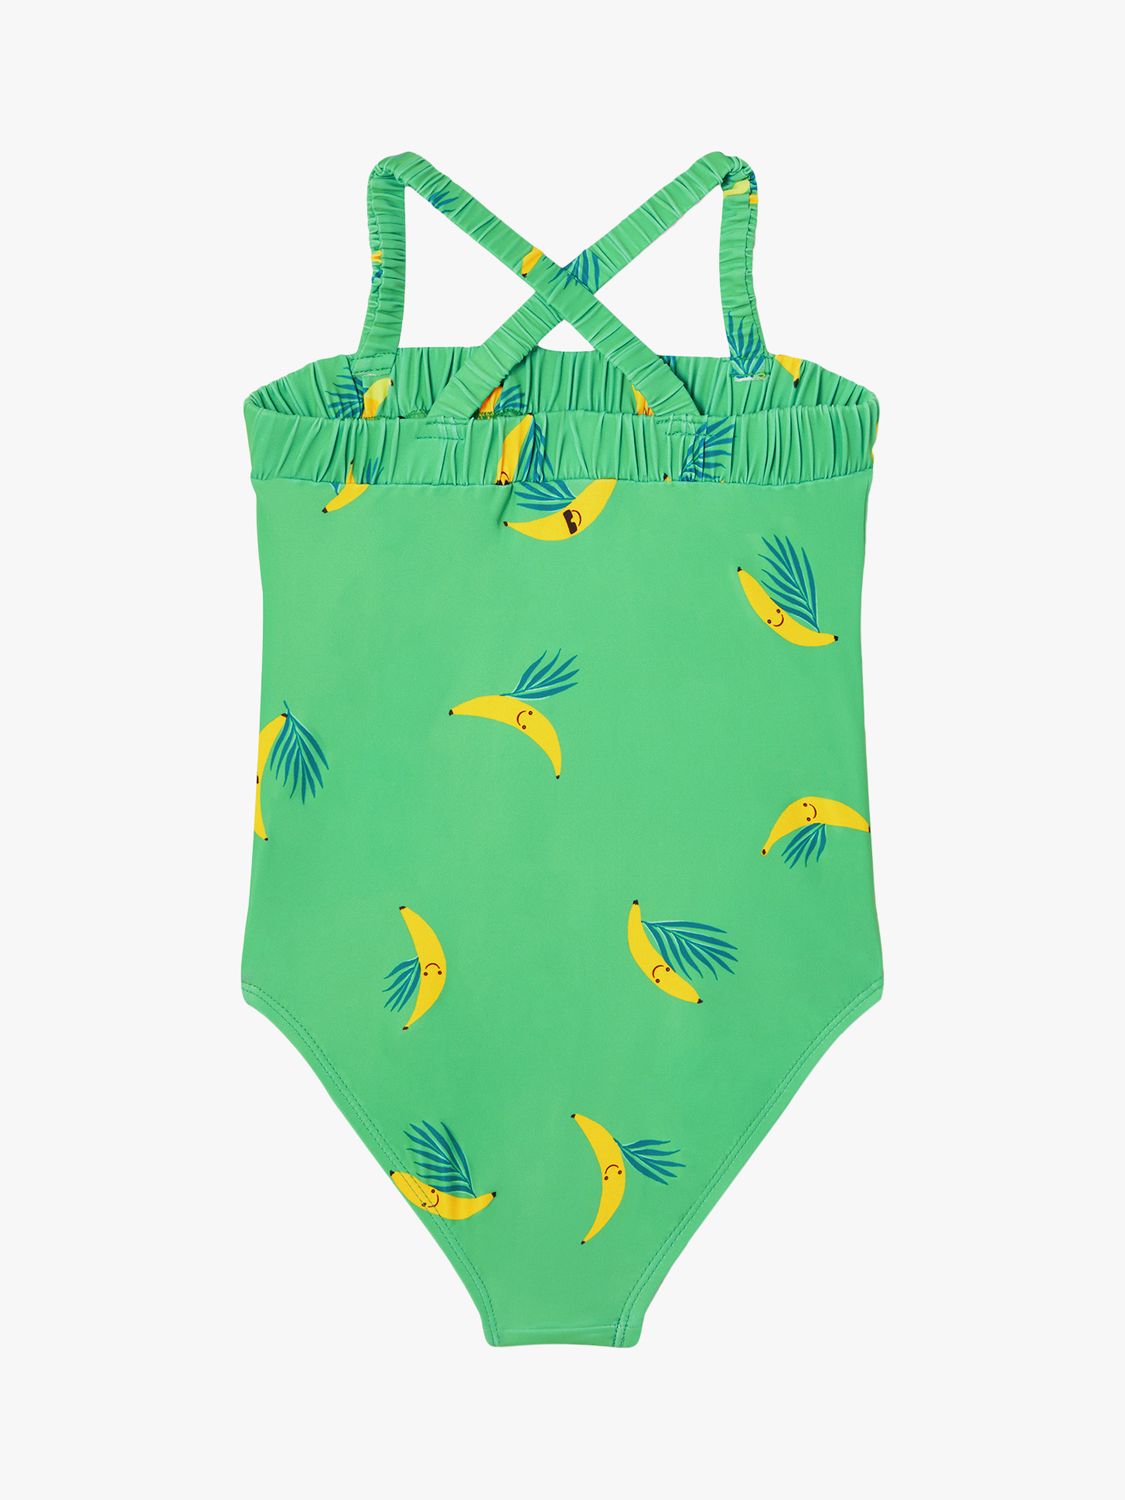 Angels by Accessorize Kids' Banana Print Swimsuit, Green/Multi, 18-24M